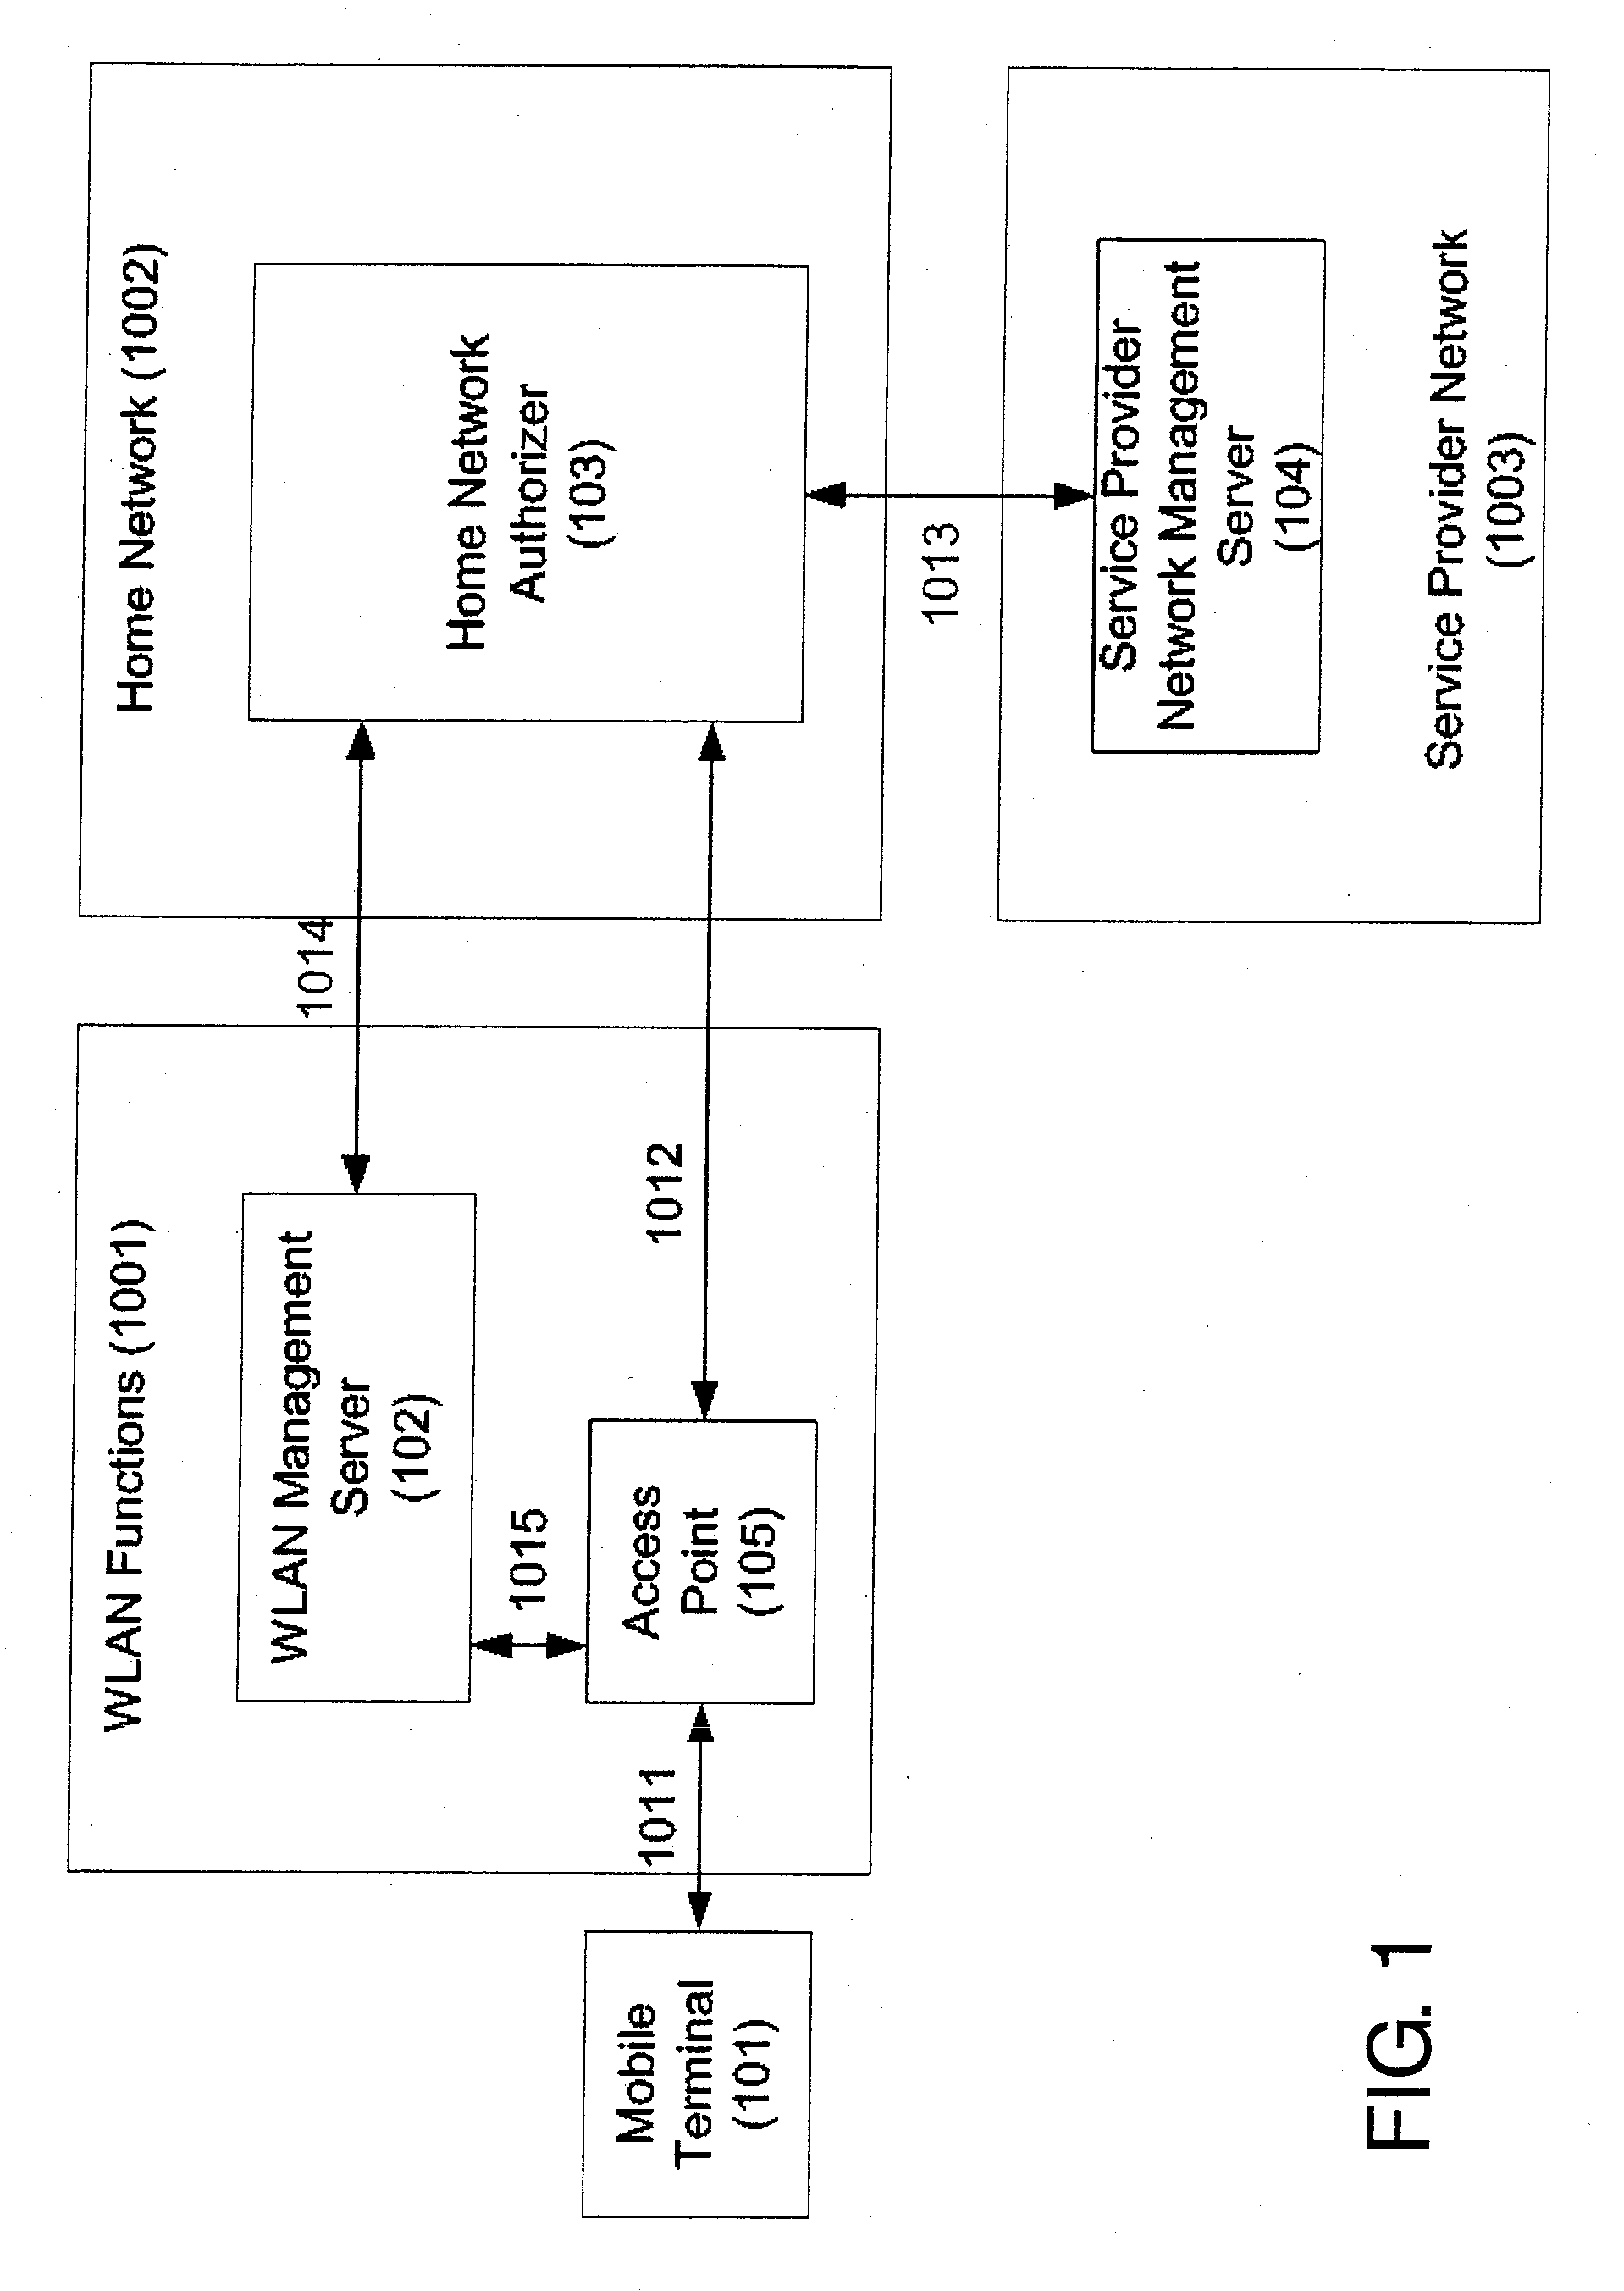 Service in WLAN inter-working, address management system, and method